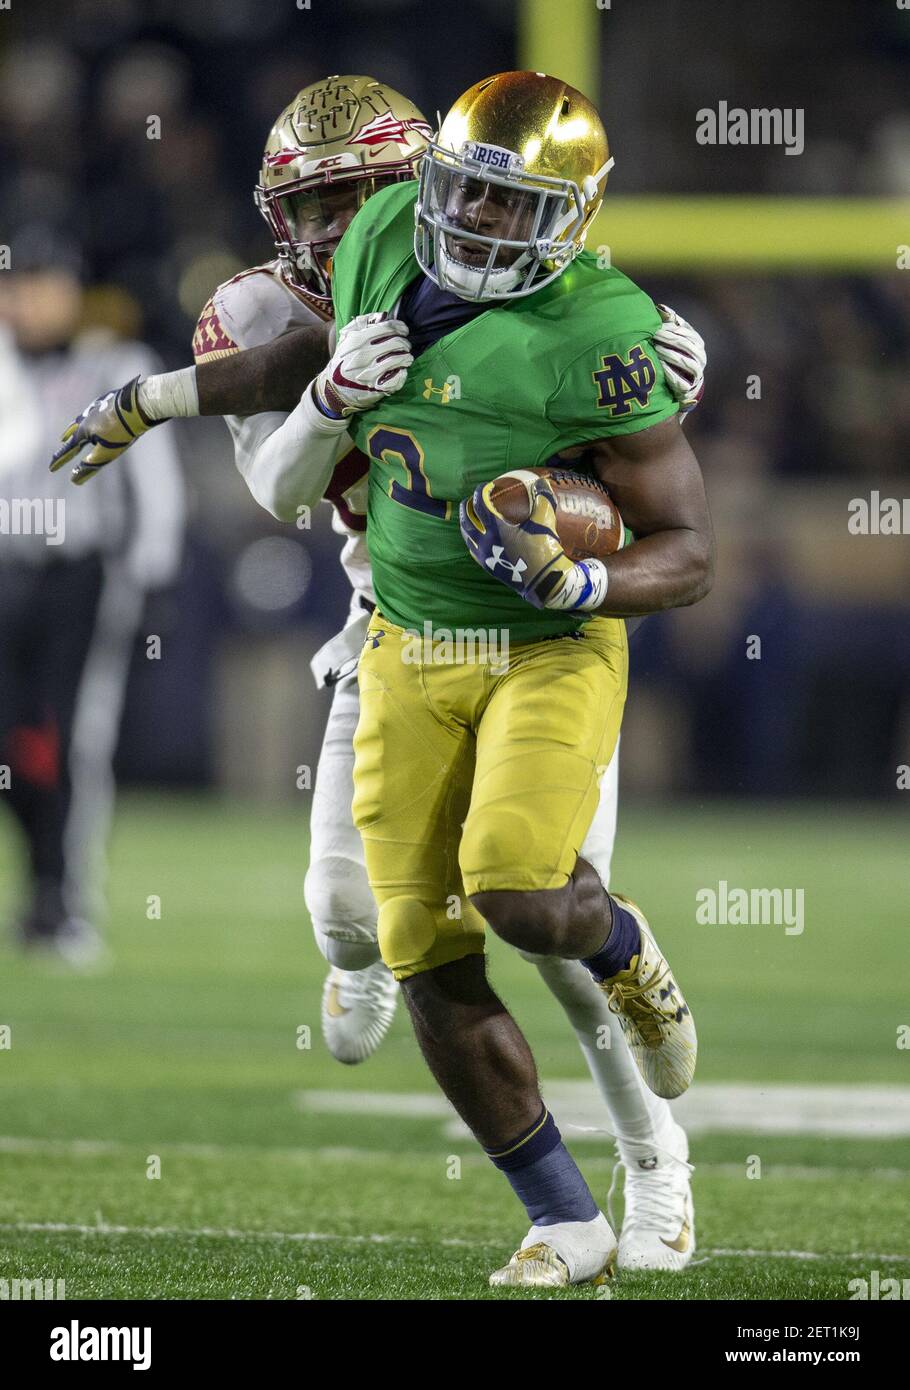 November 10, 2018: Notre Dame running back Dexter Williams (2) runs with  the ball for yardage as Florida State defensive back Cyrus Fagan (24)  defends during NCAA football game action between the